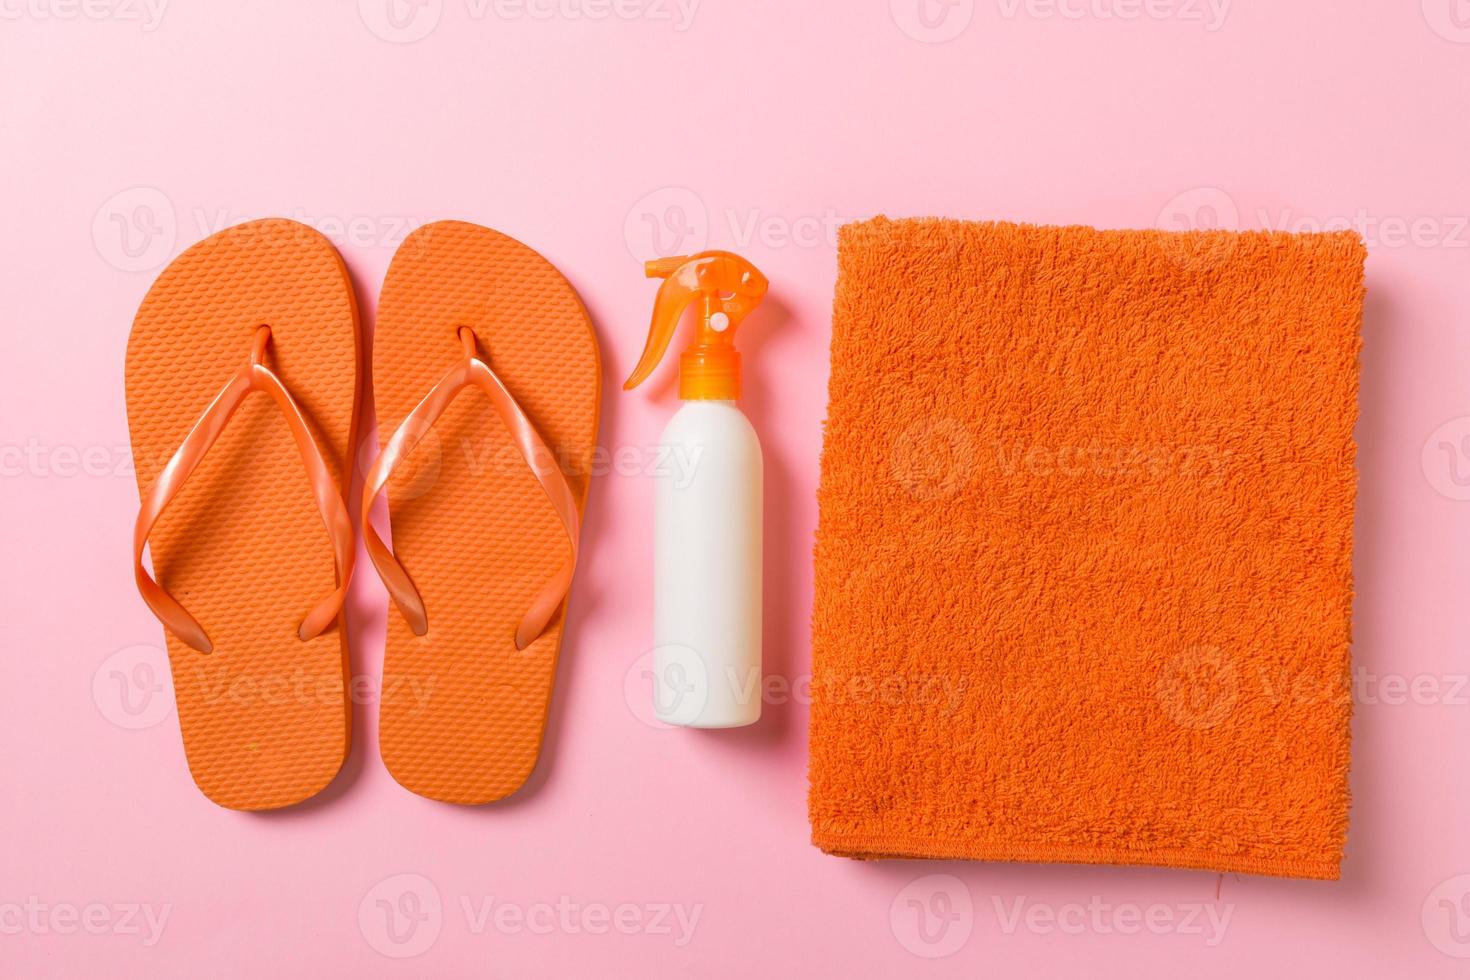 Top view of Beach flat lay accessories. sunscreen bottle with seashells, starfish, towel and flip-flop on Colored background with copy space photo